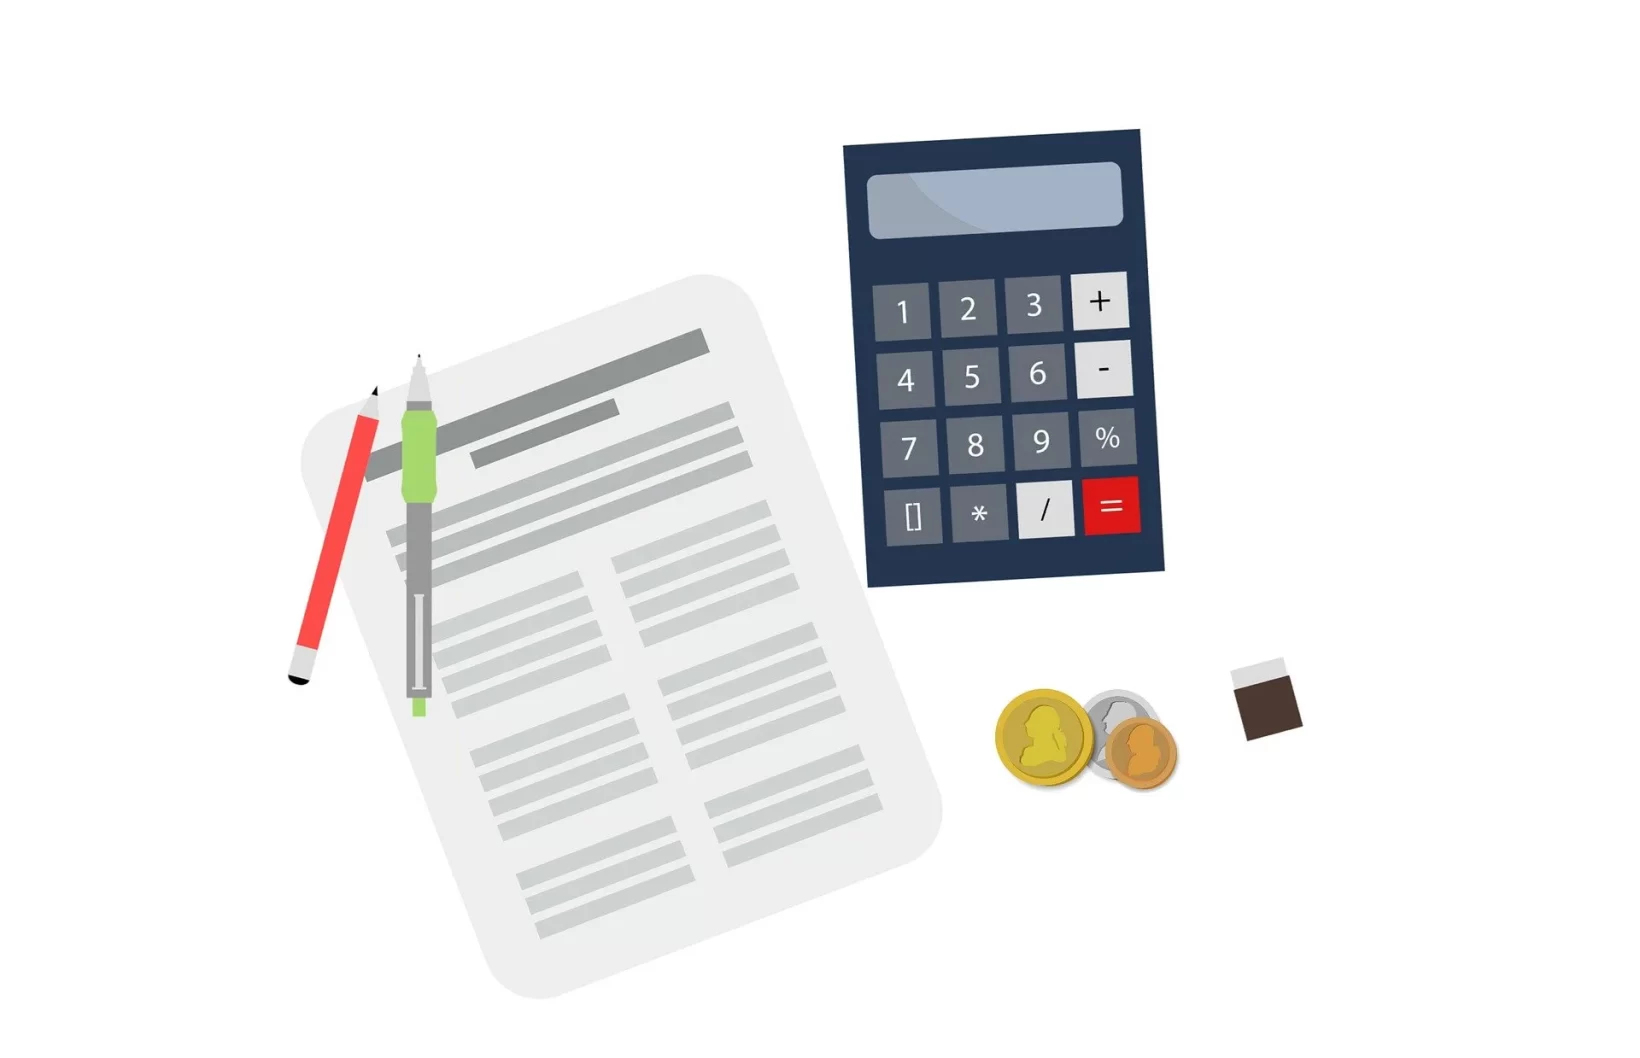 The image with a white background shows a pencil, pen, paper, calculator and some coins.